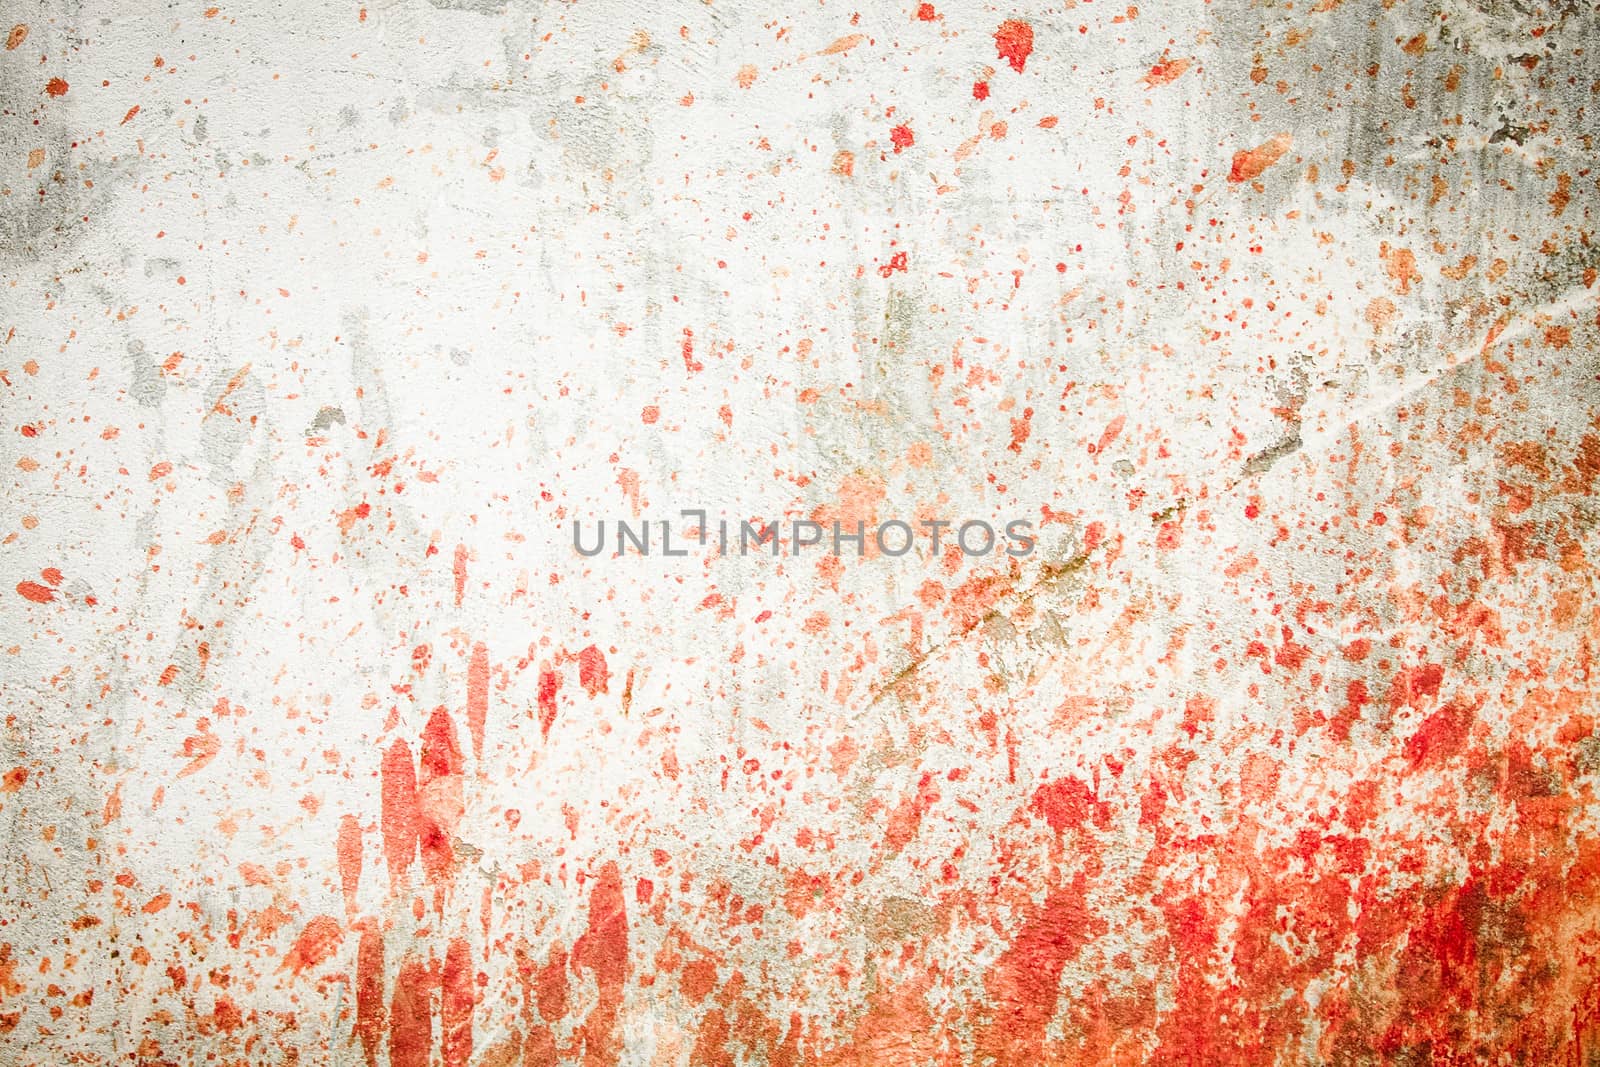 Concrete wall with blood splatters by juhku